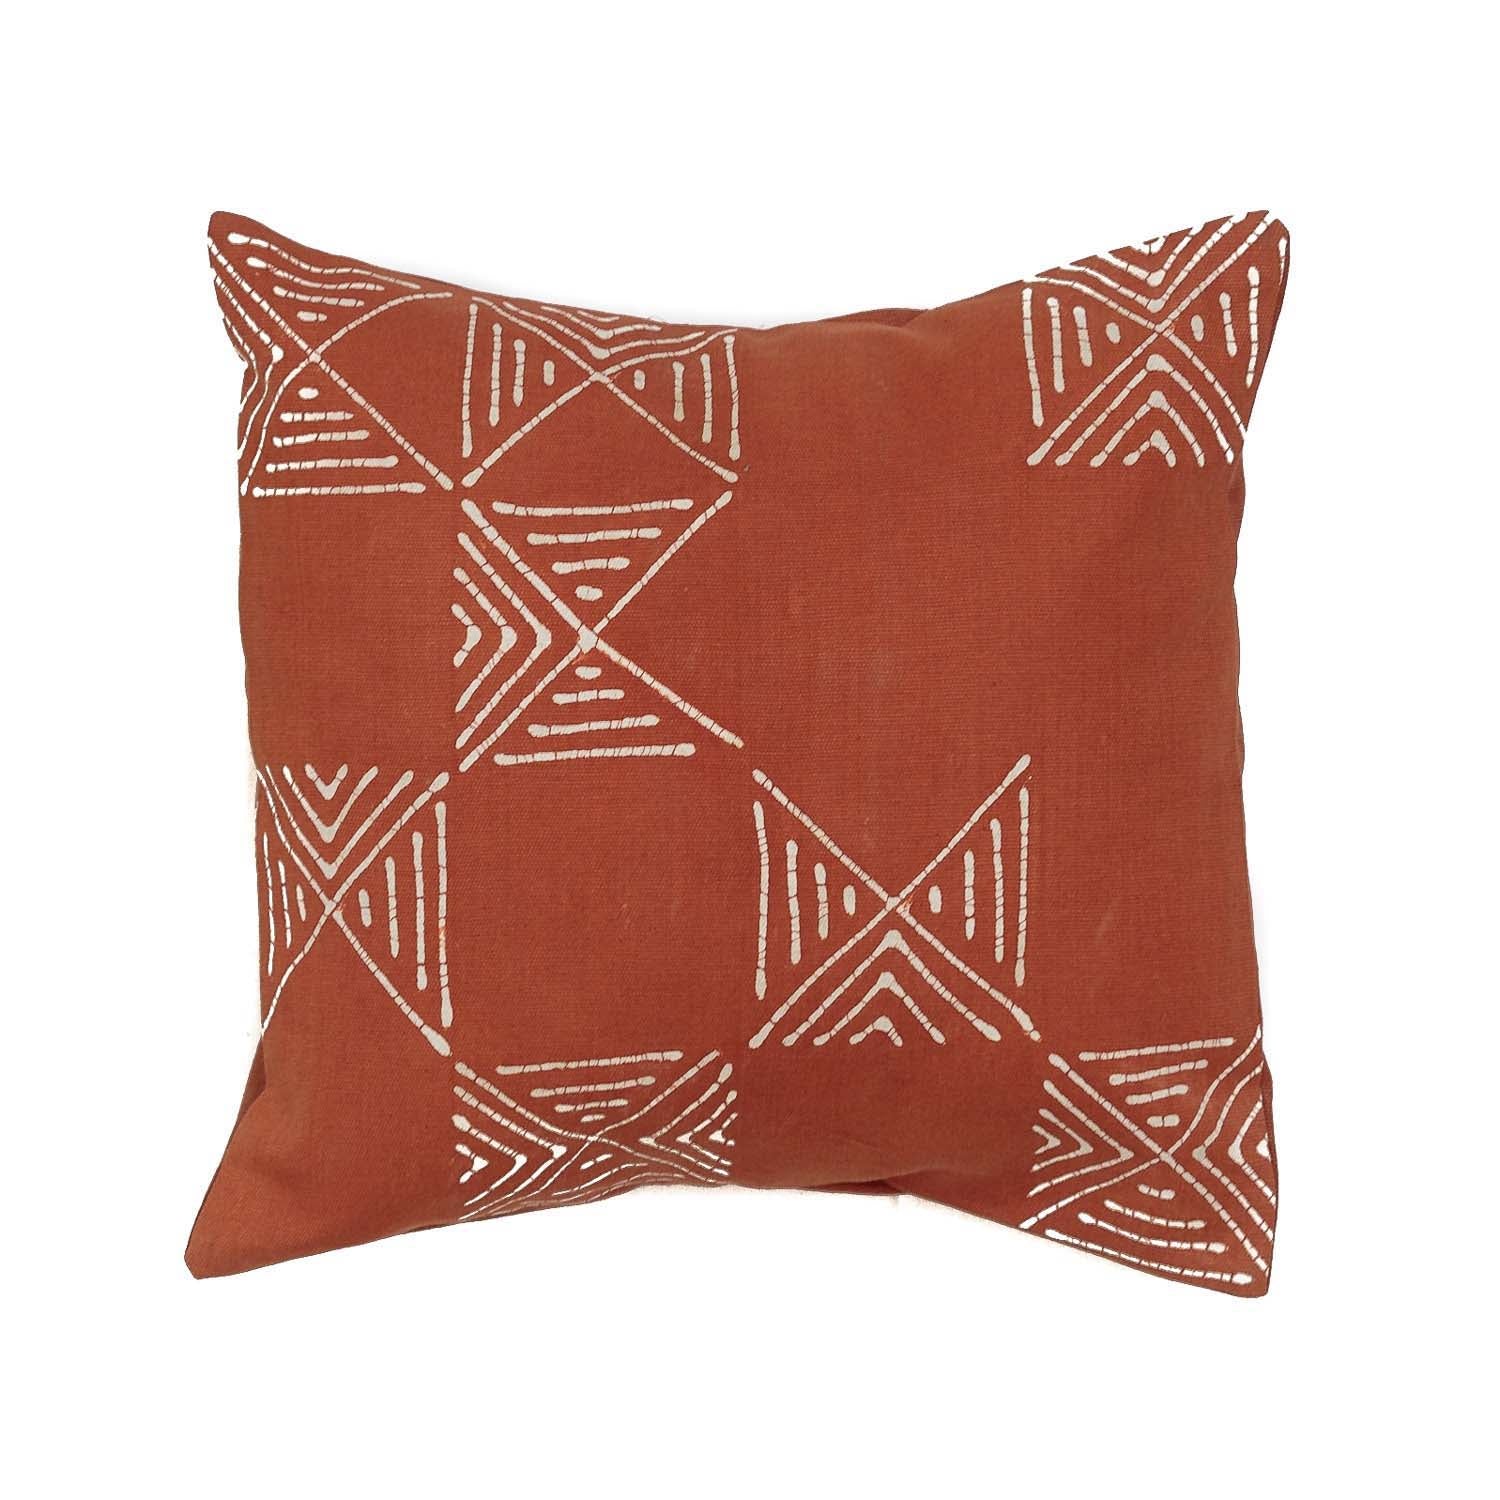 Matika Rust Grid Cushion Cover - Hand Painted by TRIBAL TEXTILES - Handcrafted Home Decor Interiors - African Made